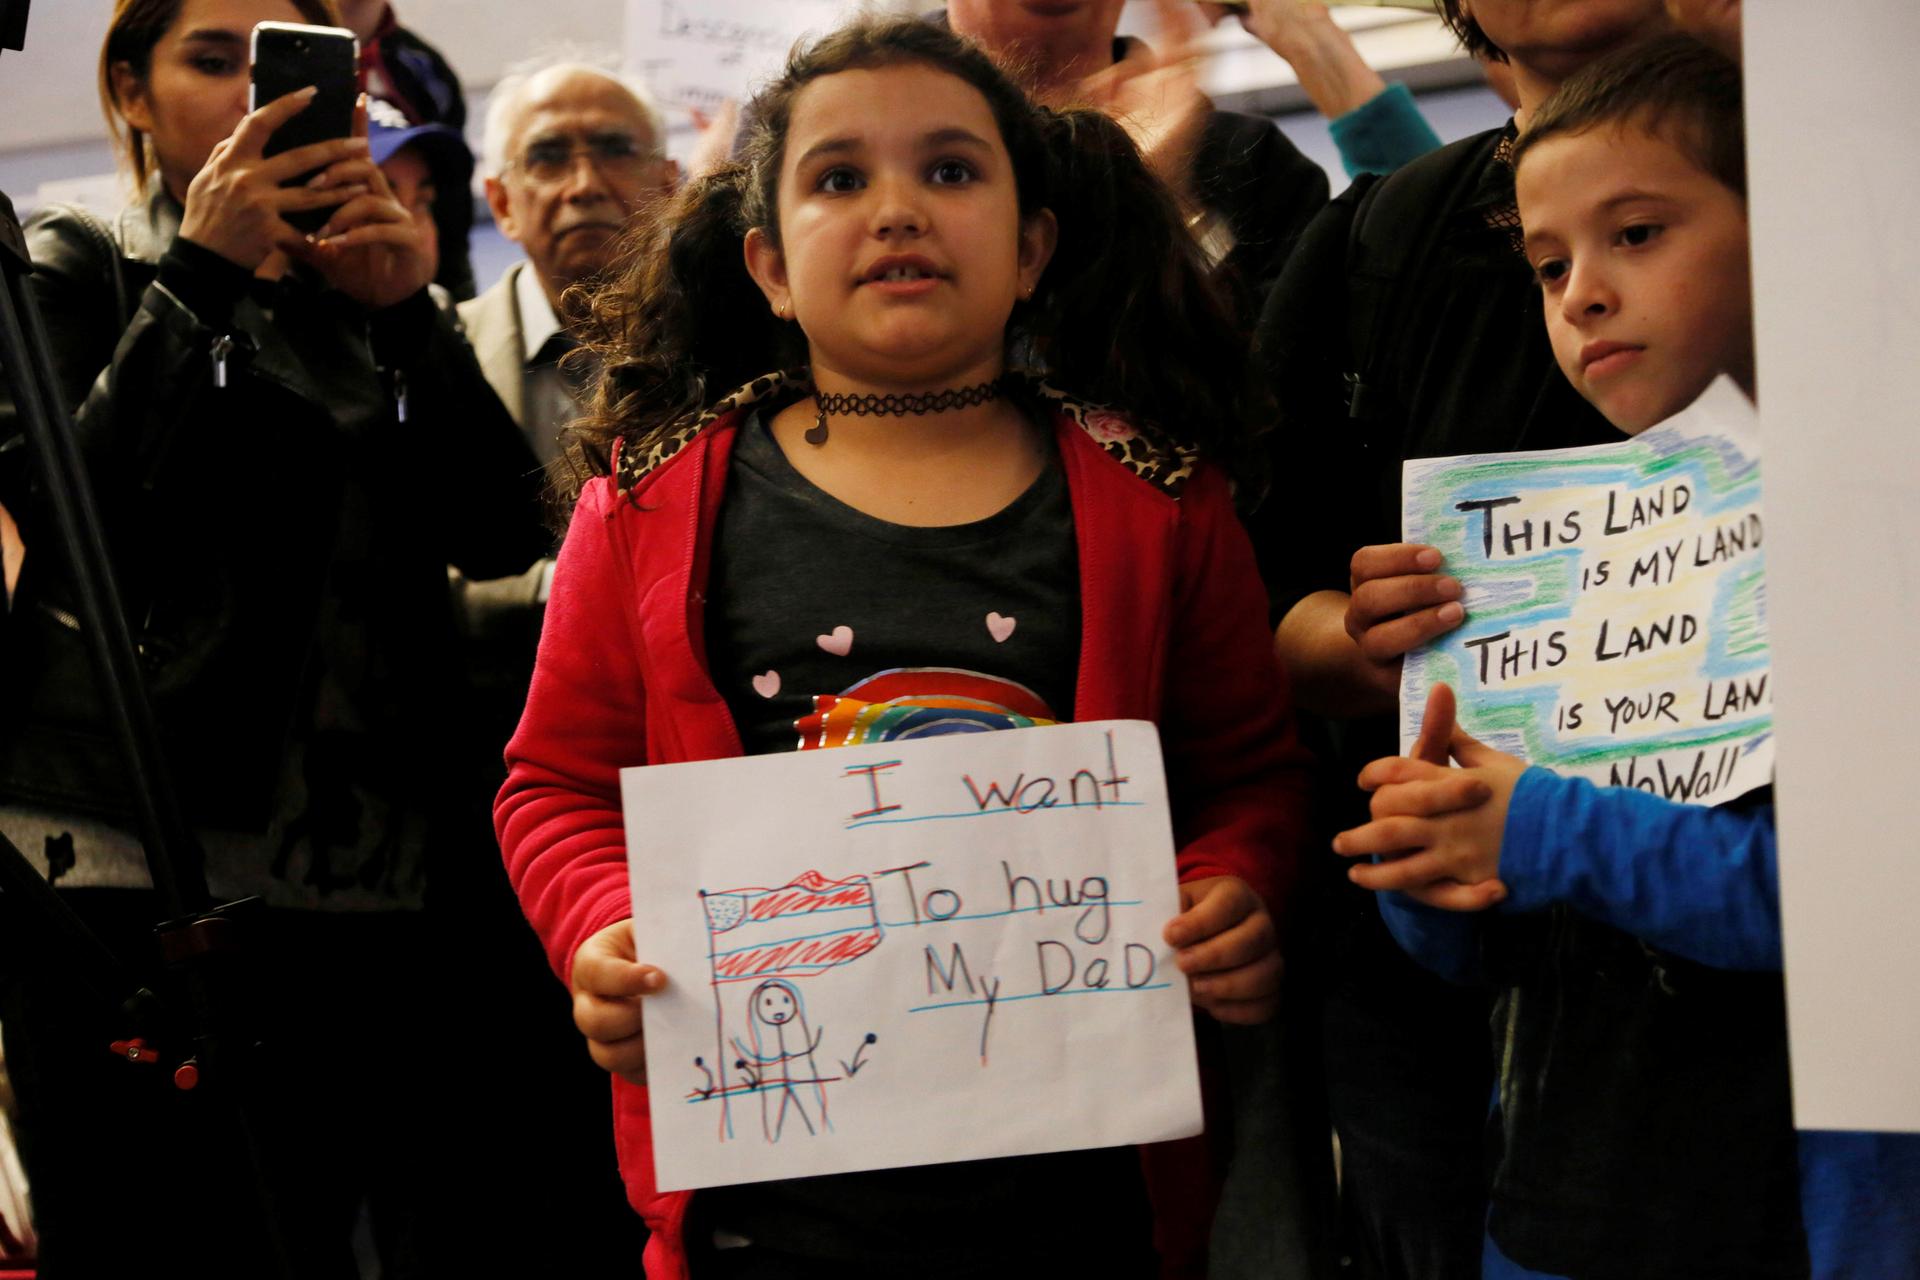 Young girl holding sign in front of crowd, "I want to hug my dad"